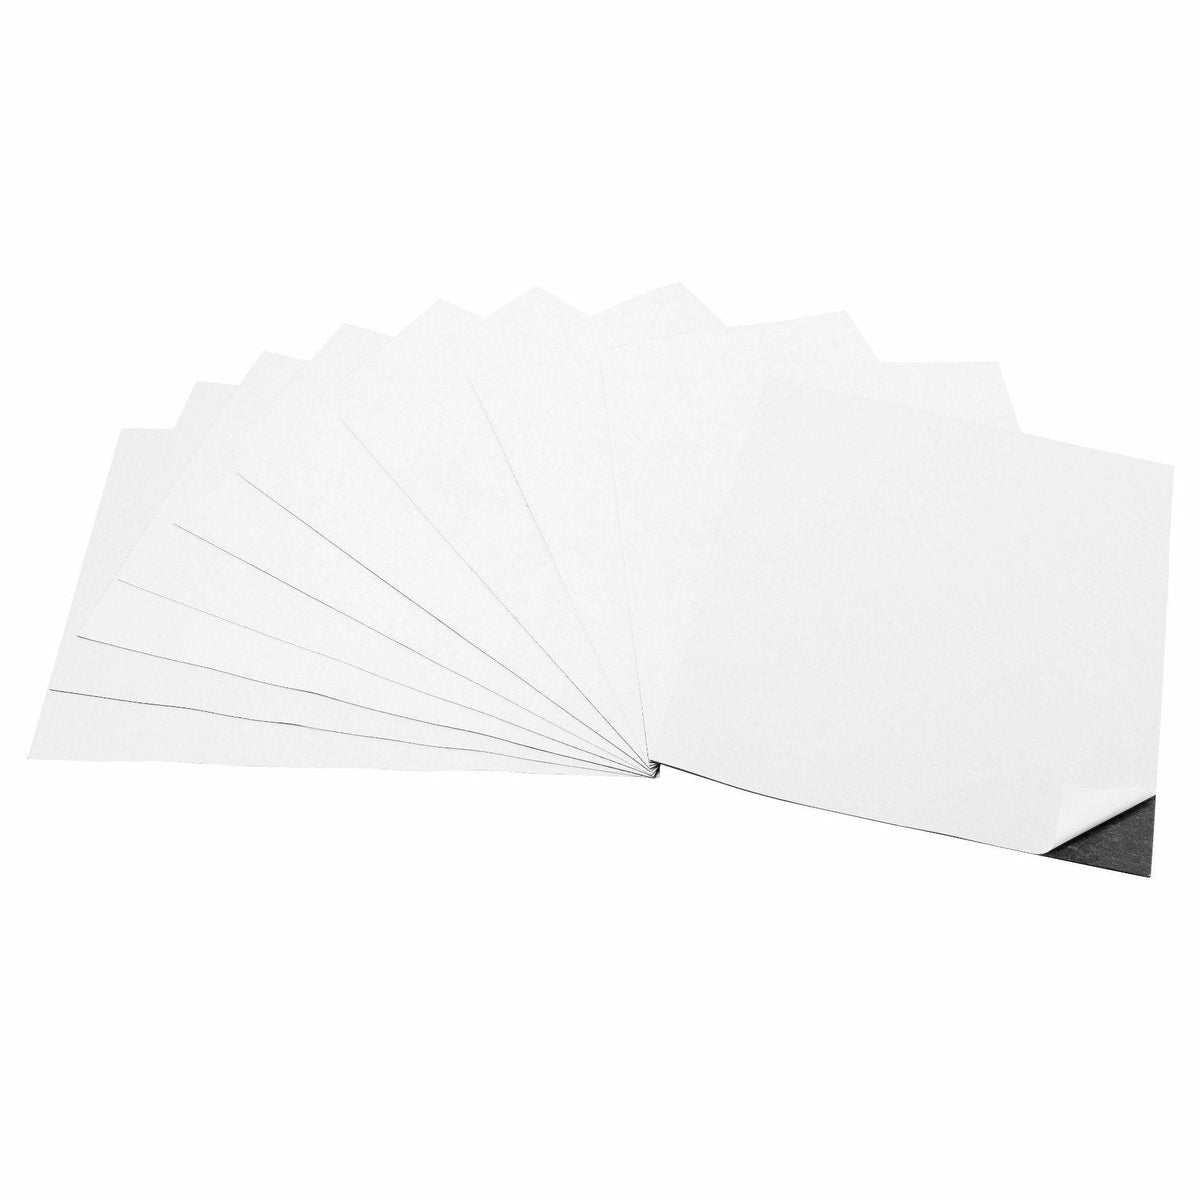 8 x 10 Inch Strong Flexible Self-Adhesive Magnetic Sheets Peel